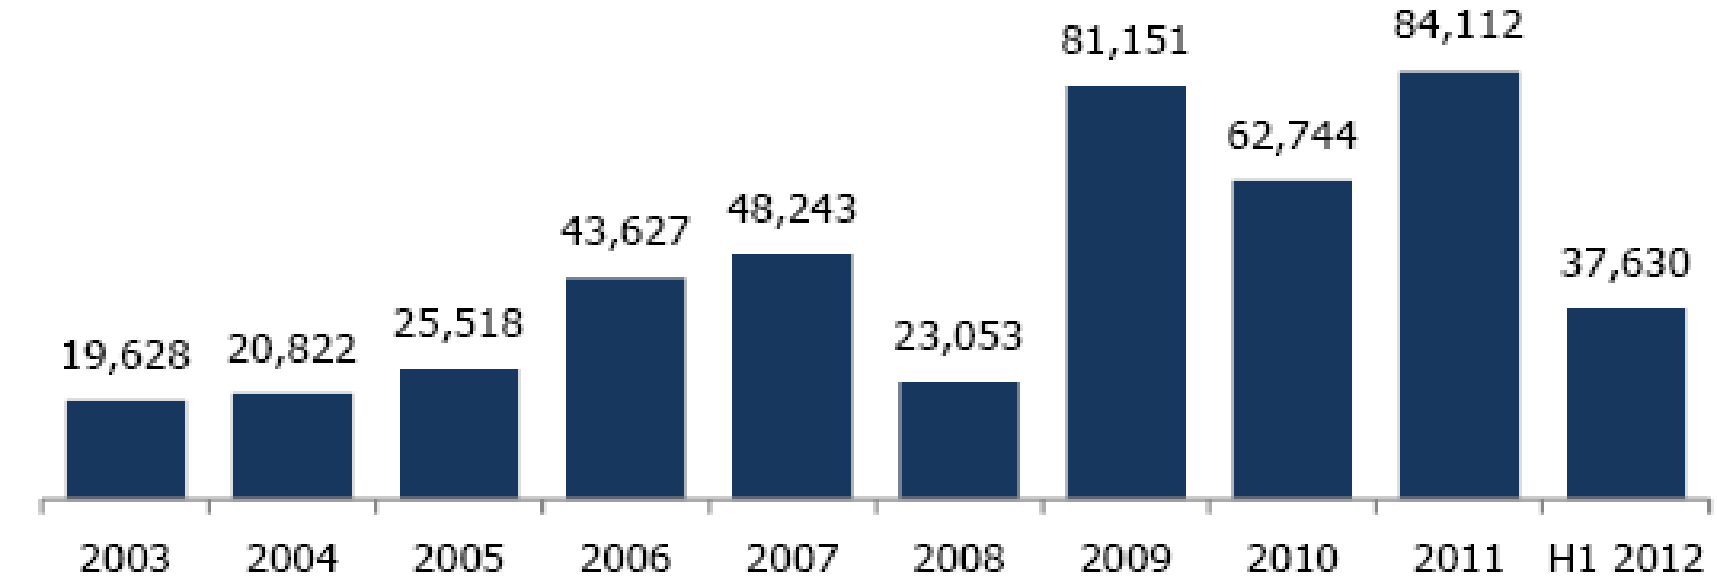 GCC collective Bonds Market from 2003 to 2012. Source: - Kuwait Financial Centre (2012, p.1)